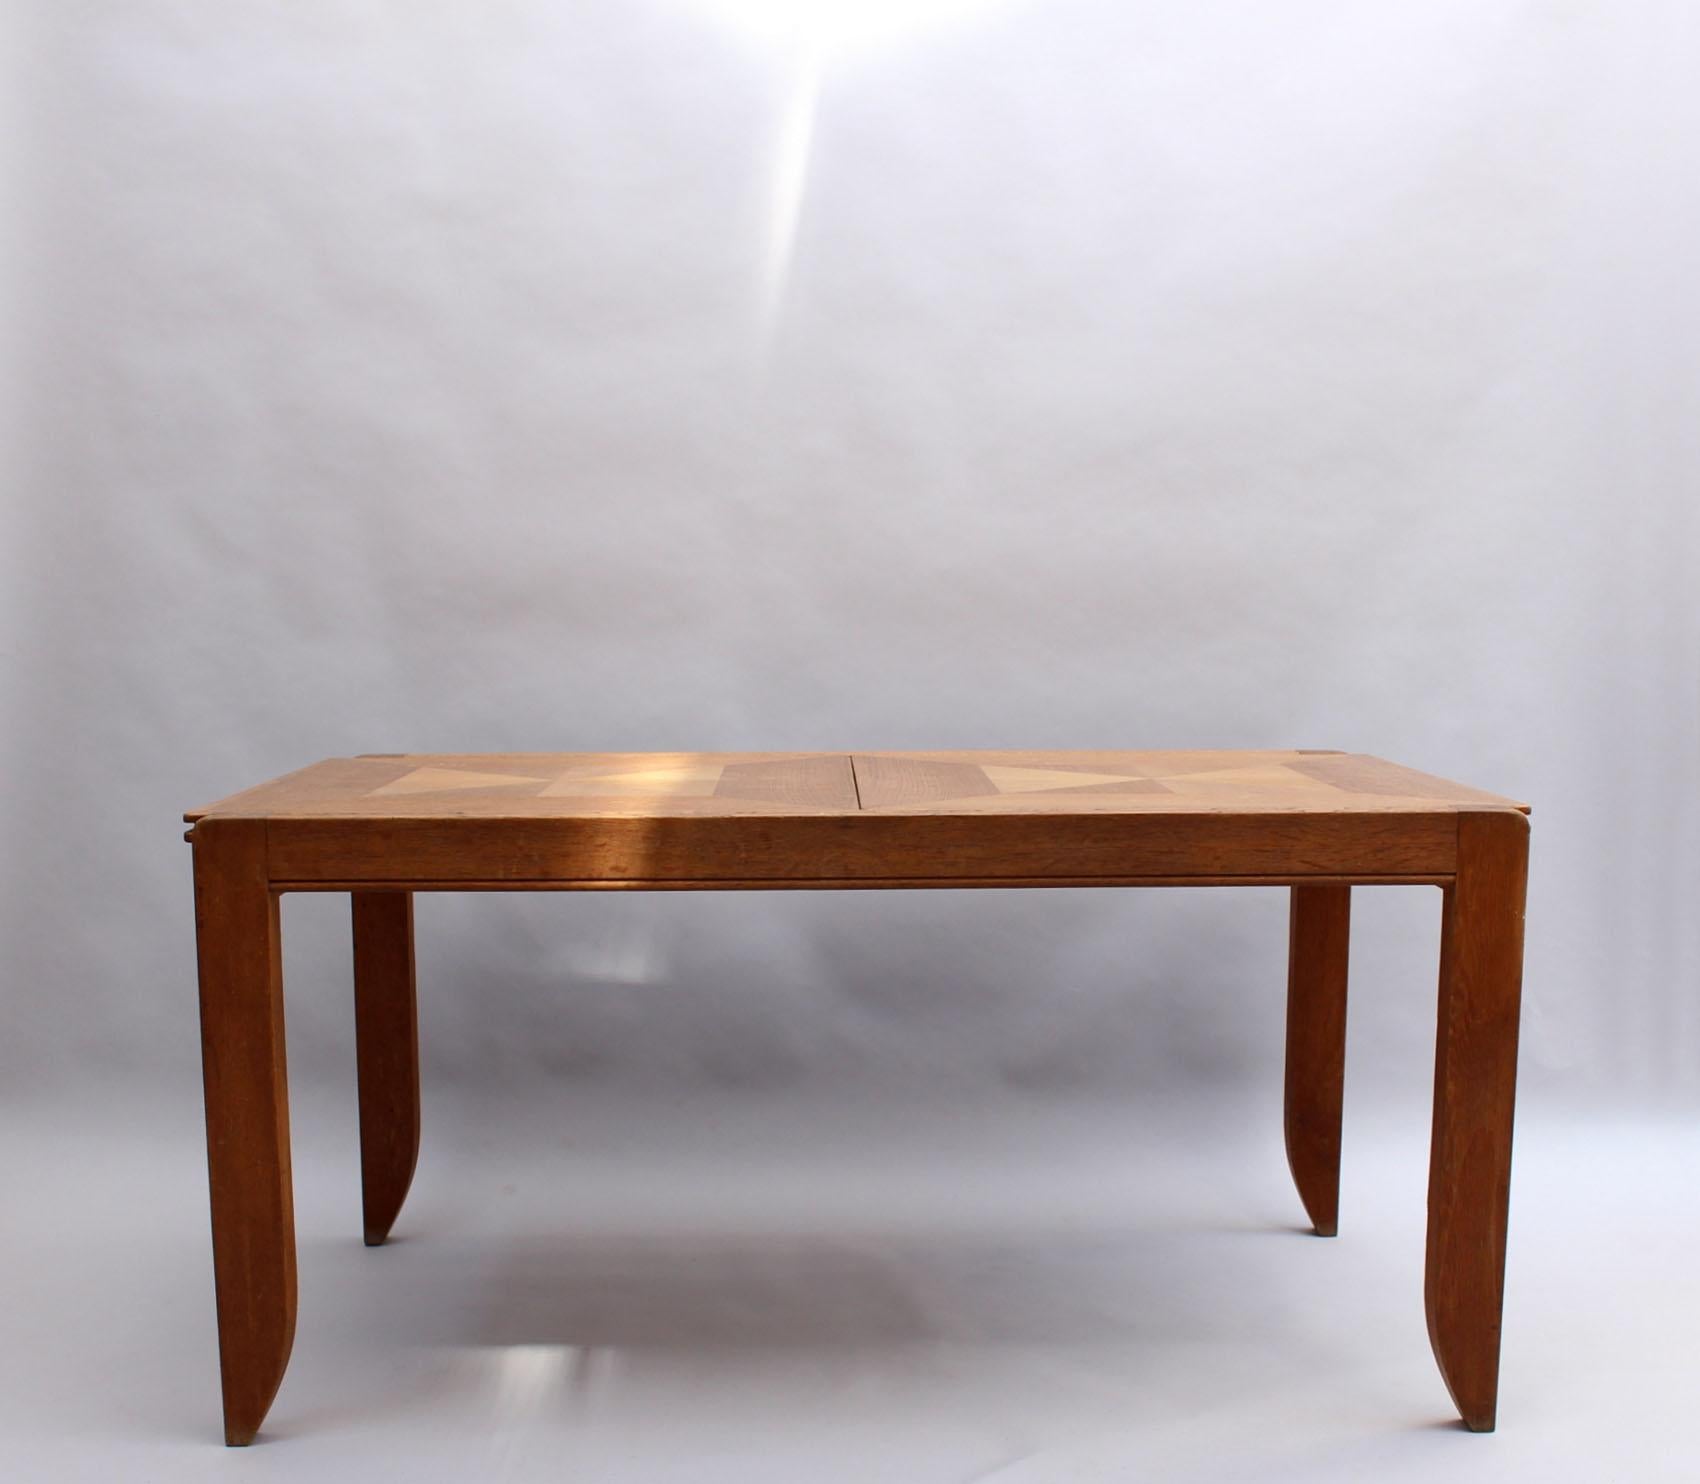 Robert Guillerme (1913-1990) and Jacques Chambron (1914-2001) : 
A fine French mid-century solid oak extendable dining/writing table.
Length with the two center leaves is 82 5/8